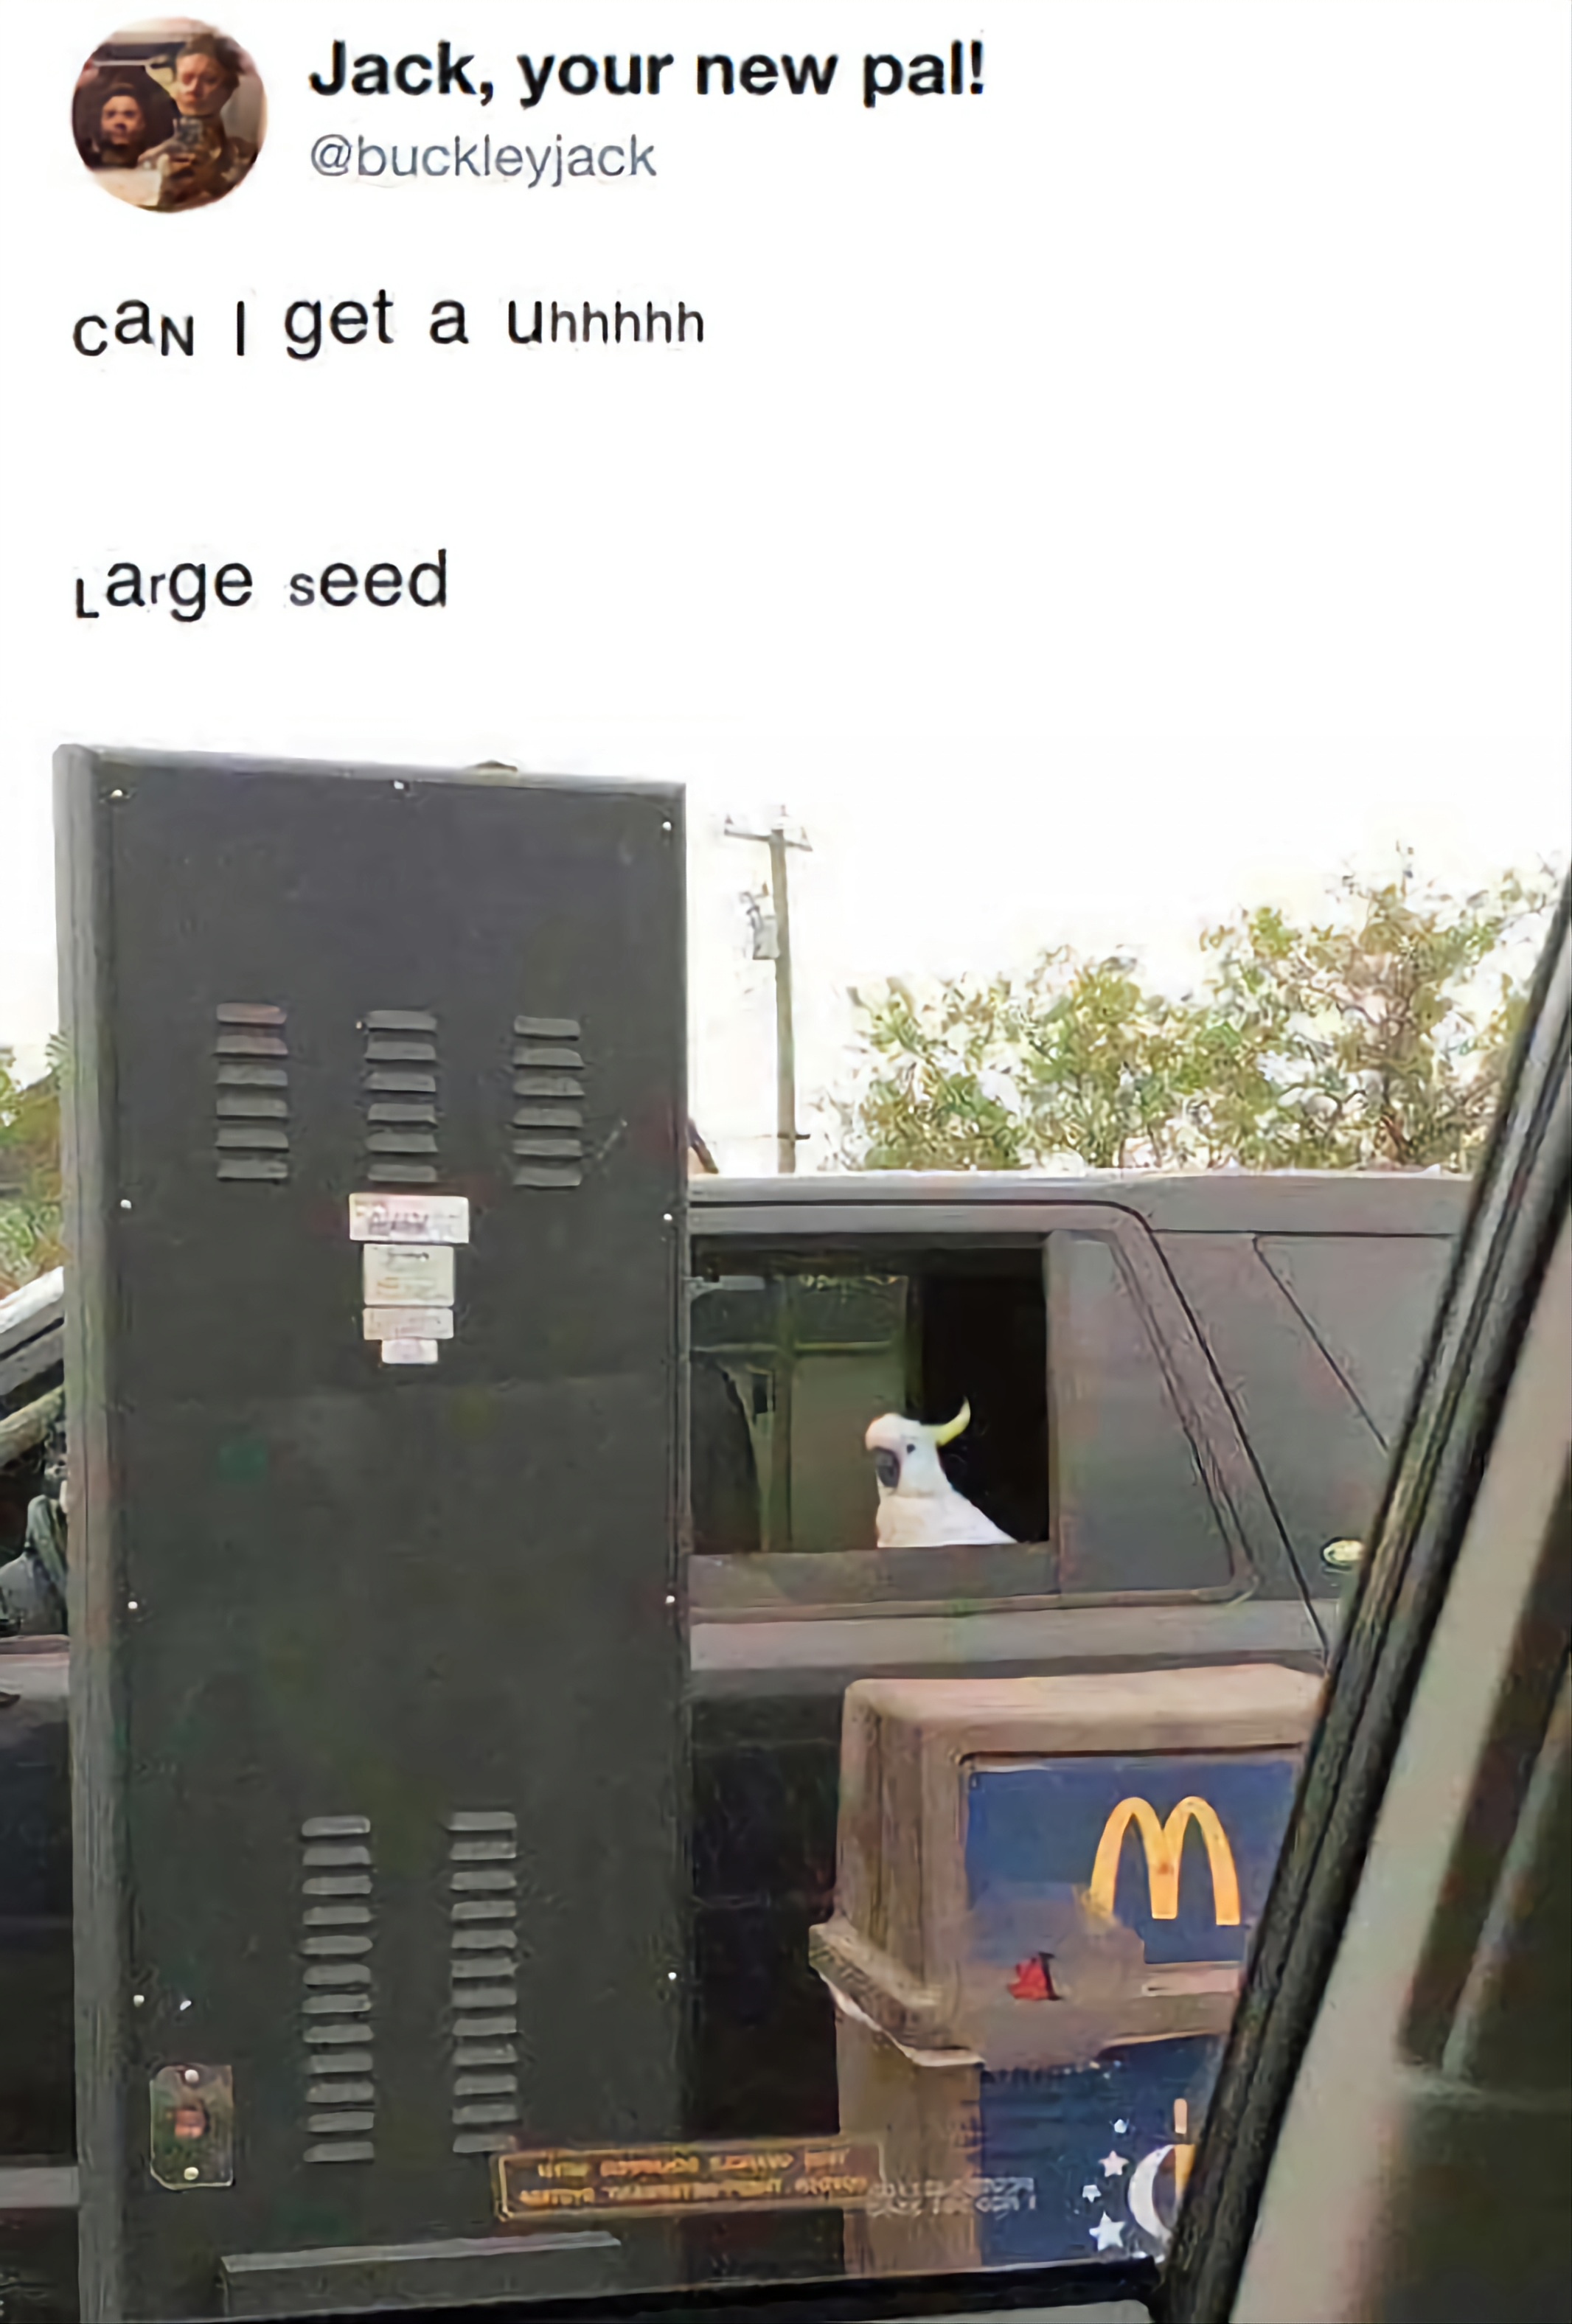 funny memes - can i get uhhhh - Jack, your new pal! can I get a Uhhhhh Large seed M